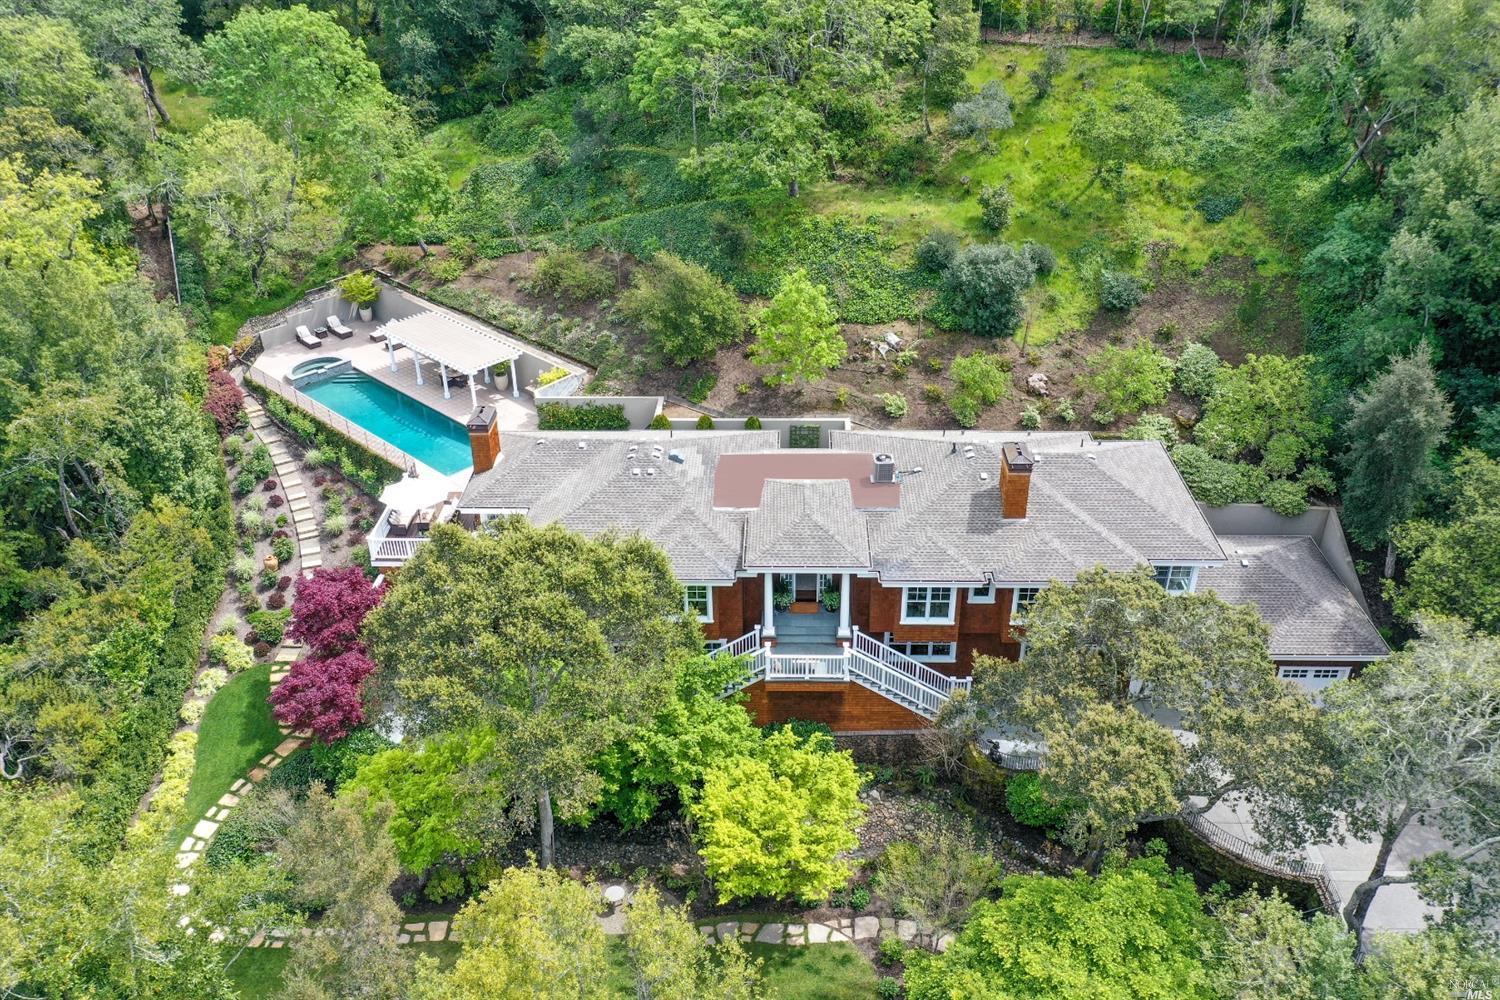 an aerial view of a house with swimming pool and outdoor space